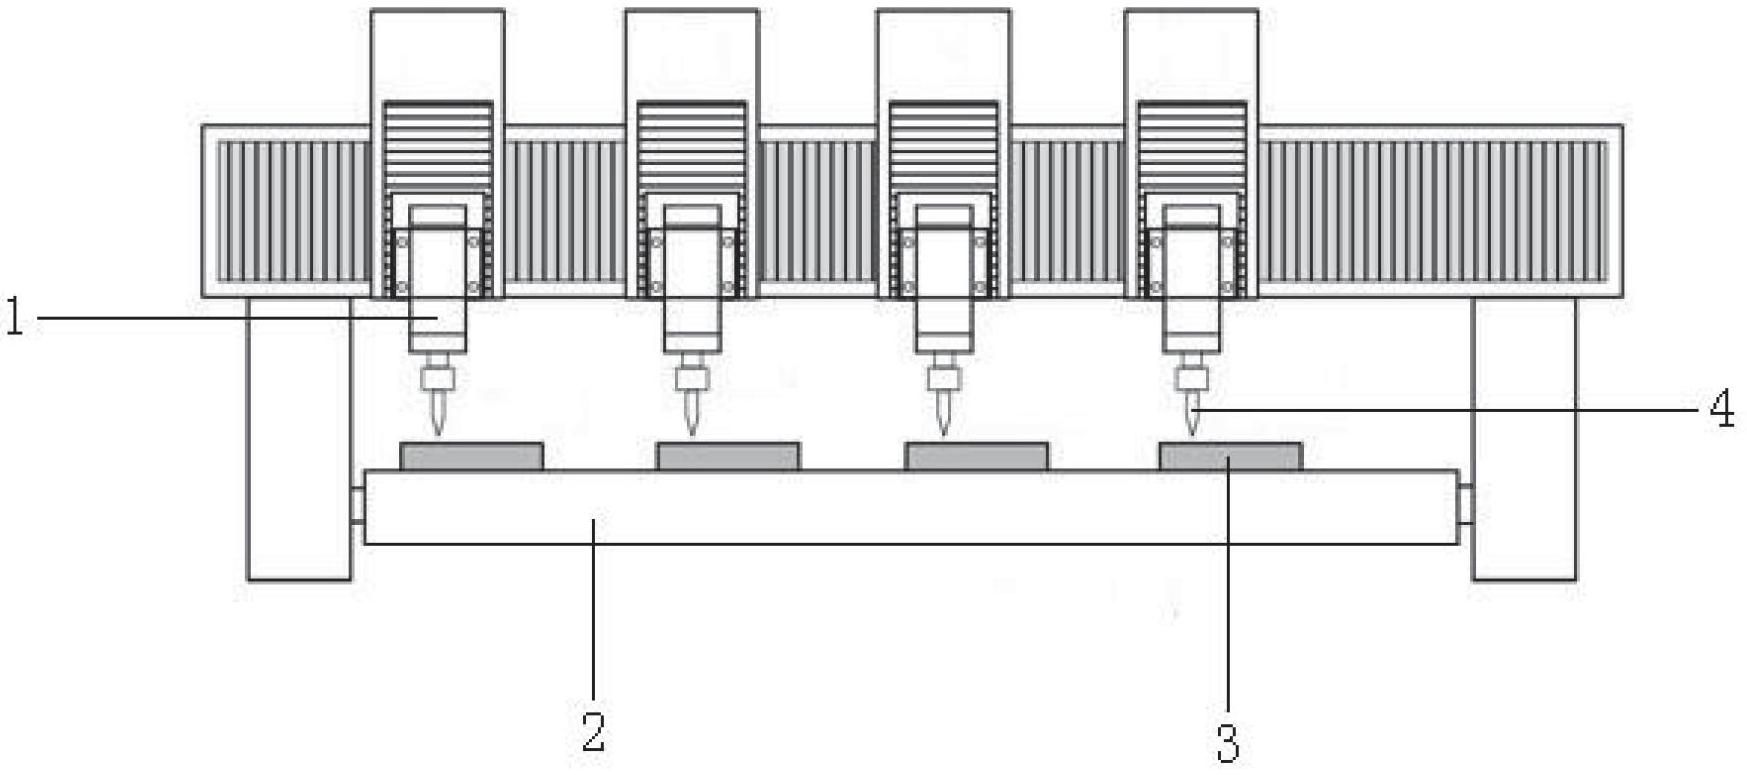 Numerical control machine with a plurality of main shafts